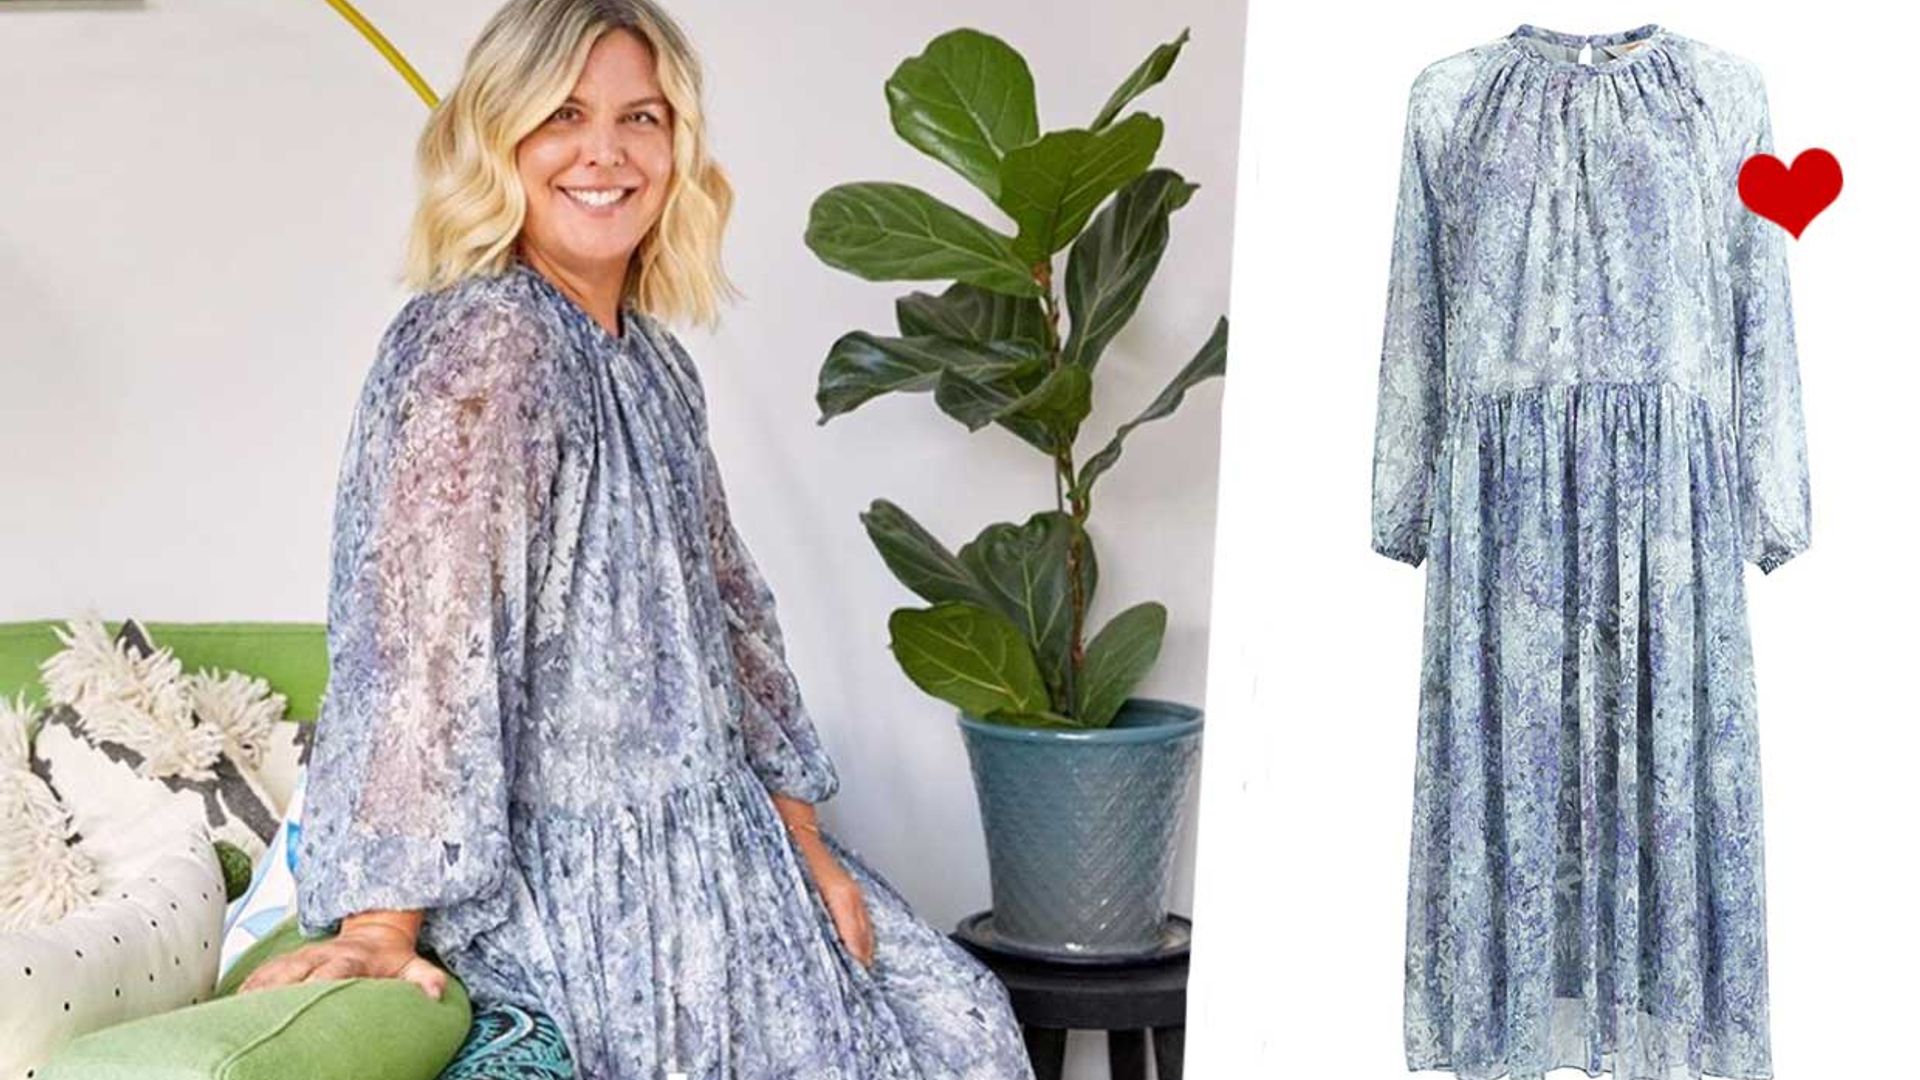 Instagram star Erica Davies just wore the John Lewis dress of the season – and it's for a good cause, too